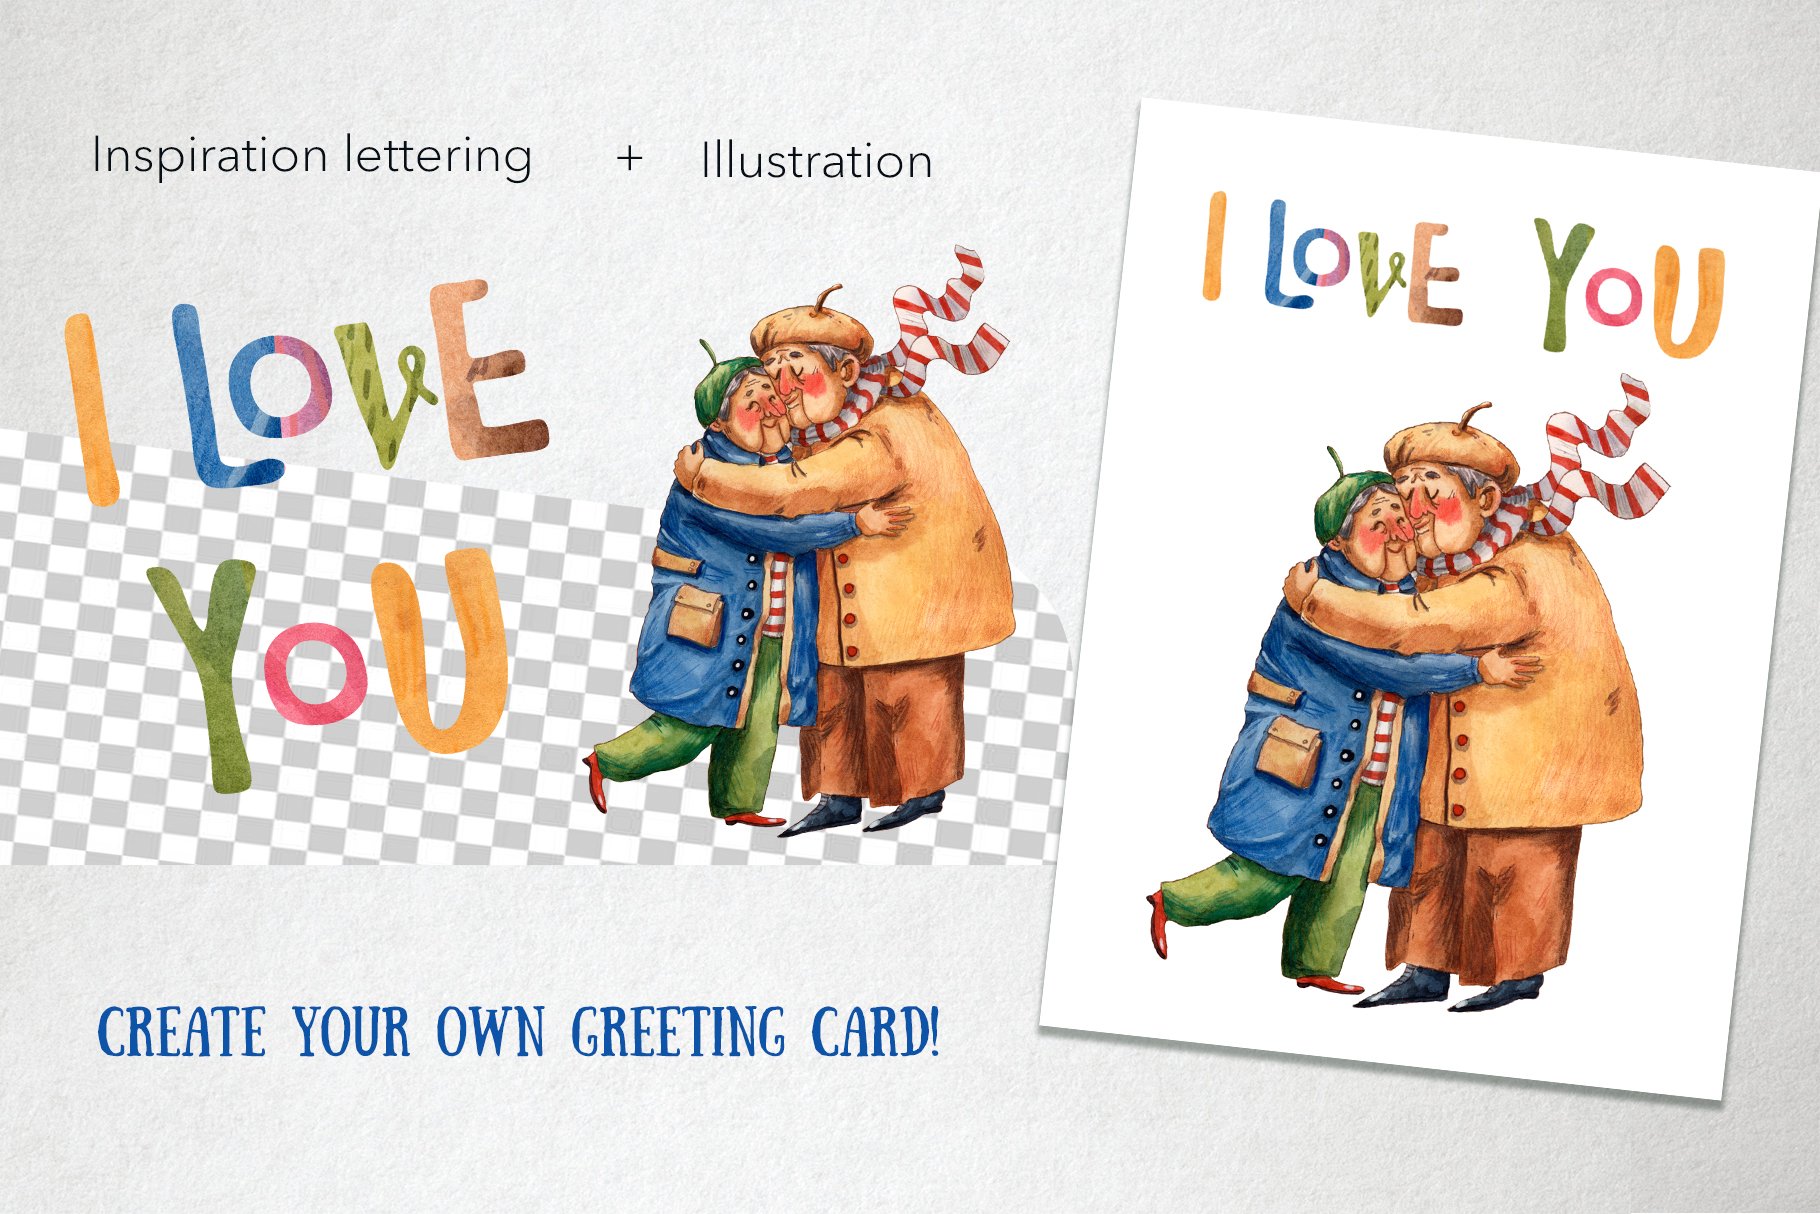 Create your own greeting card.